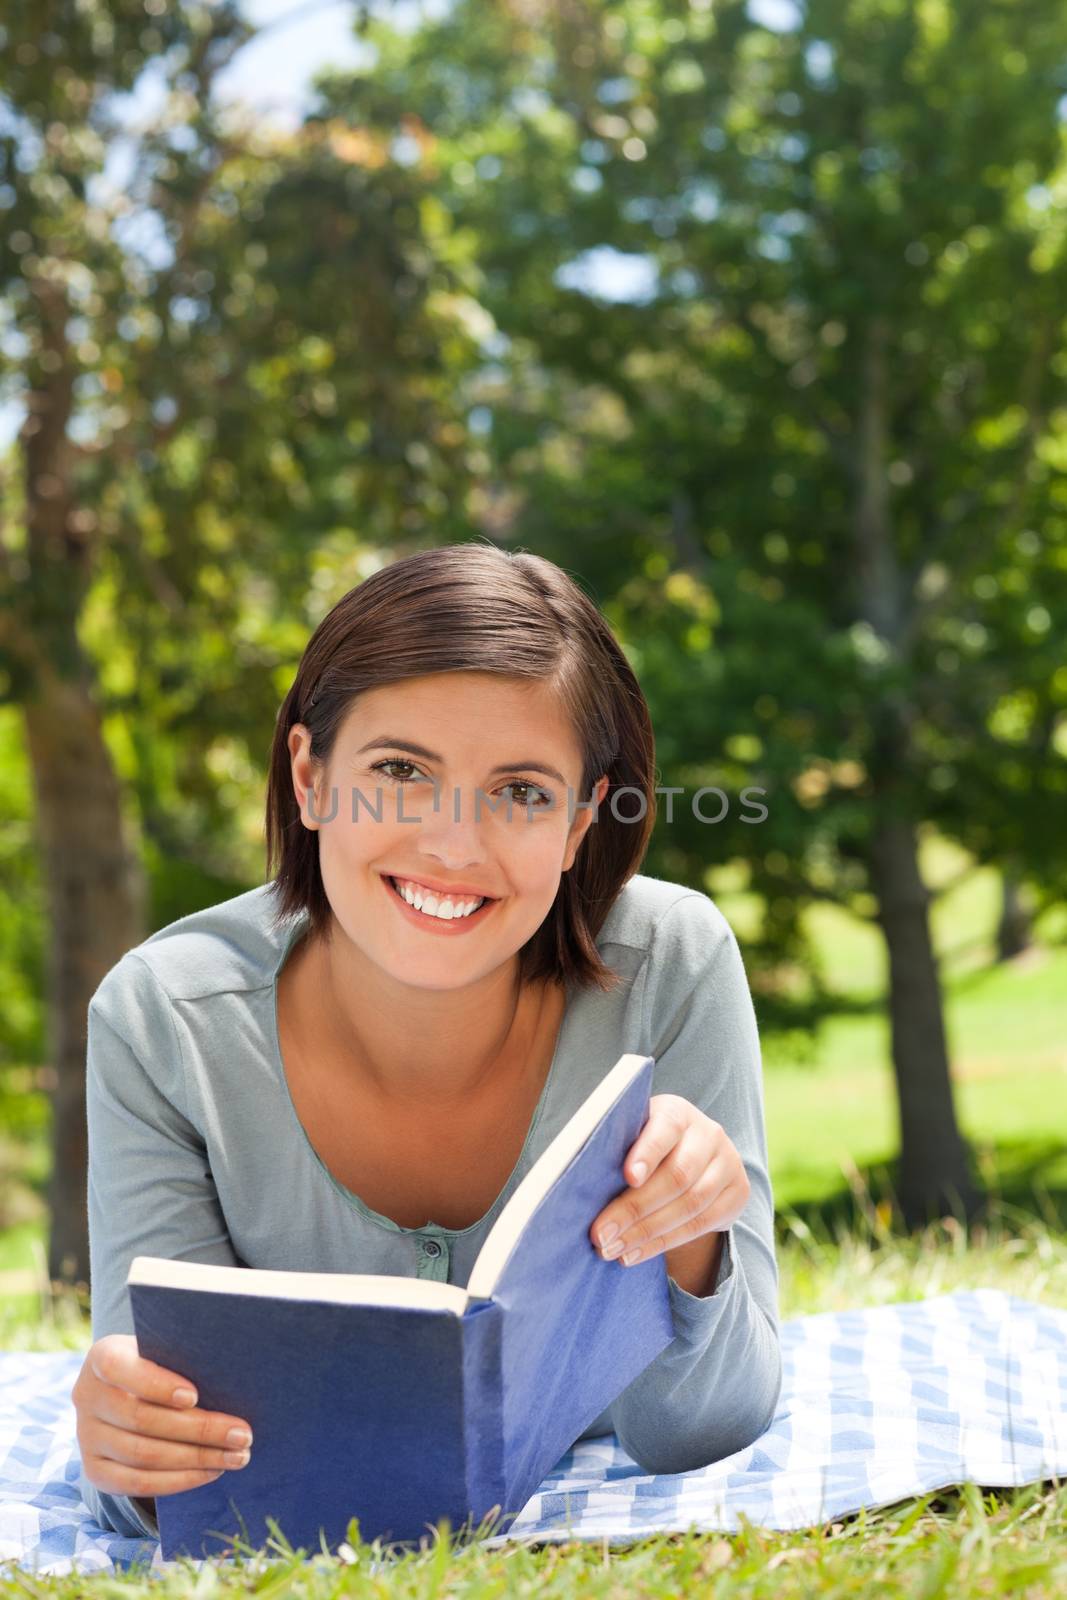 Woman reading a book in the park by Wavebreakmedia